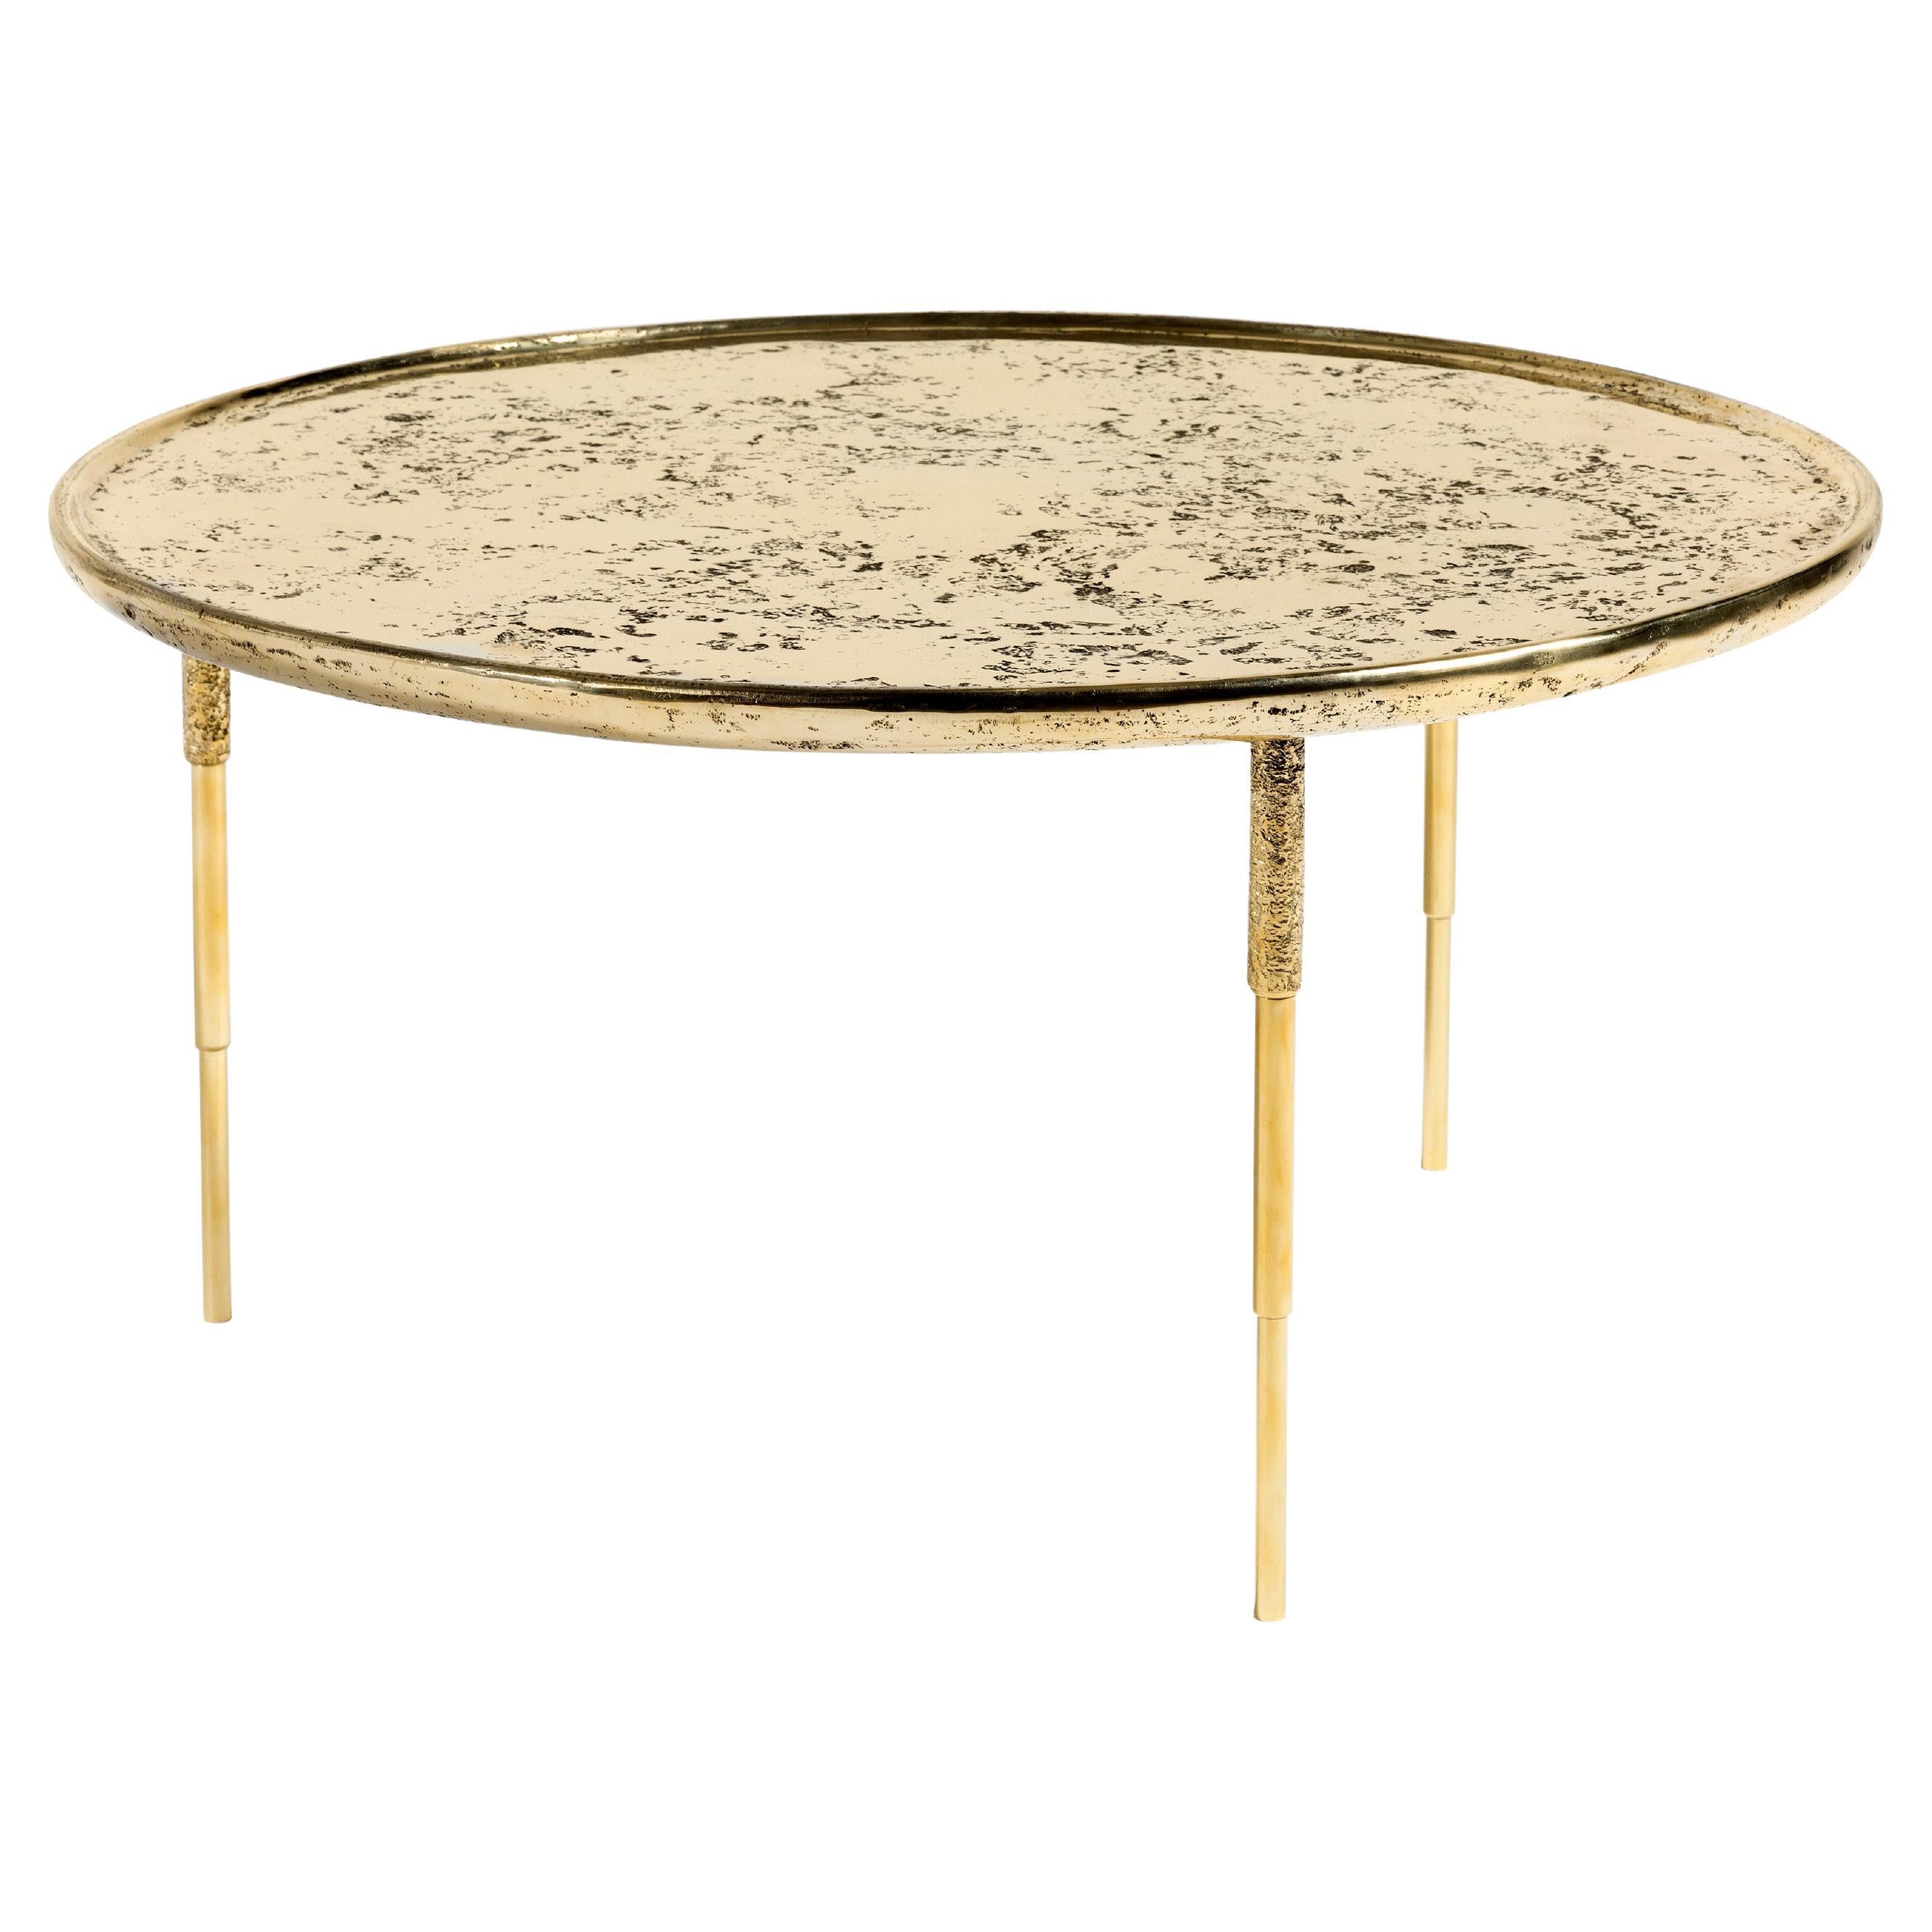 Cornelio Cappellini Coffee and Cocktail Tables - 10 For Sale at 1stDibs